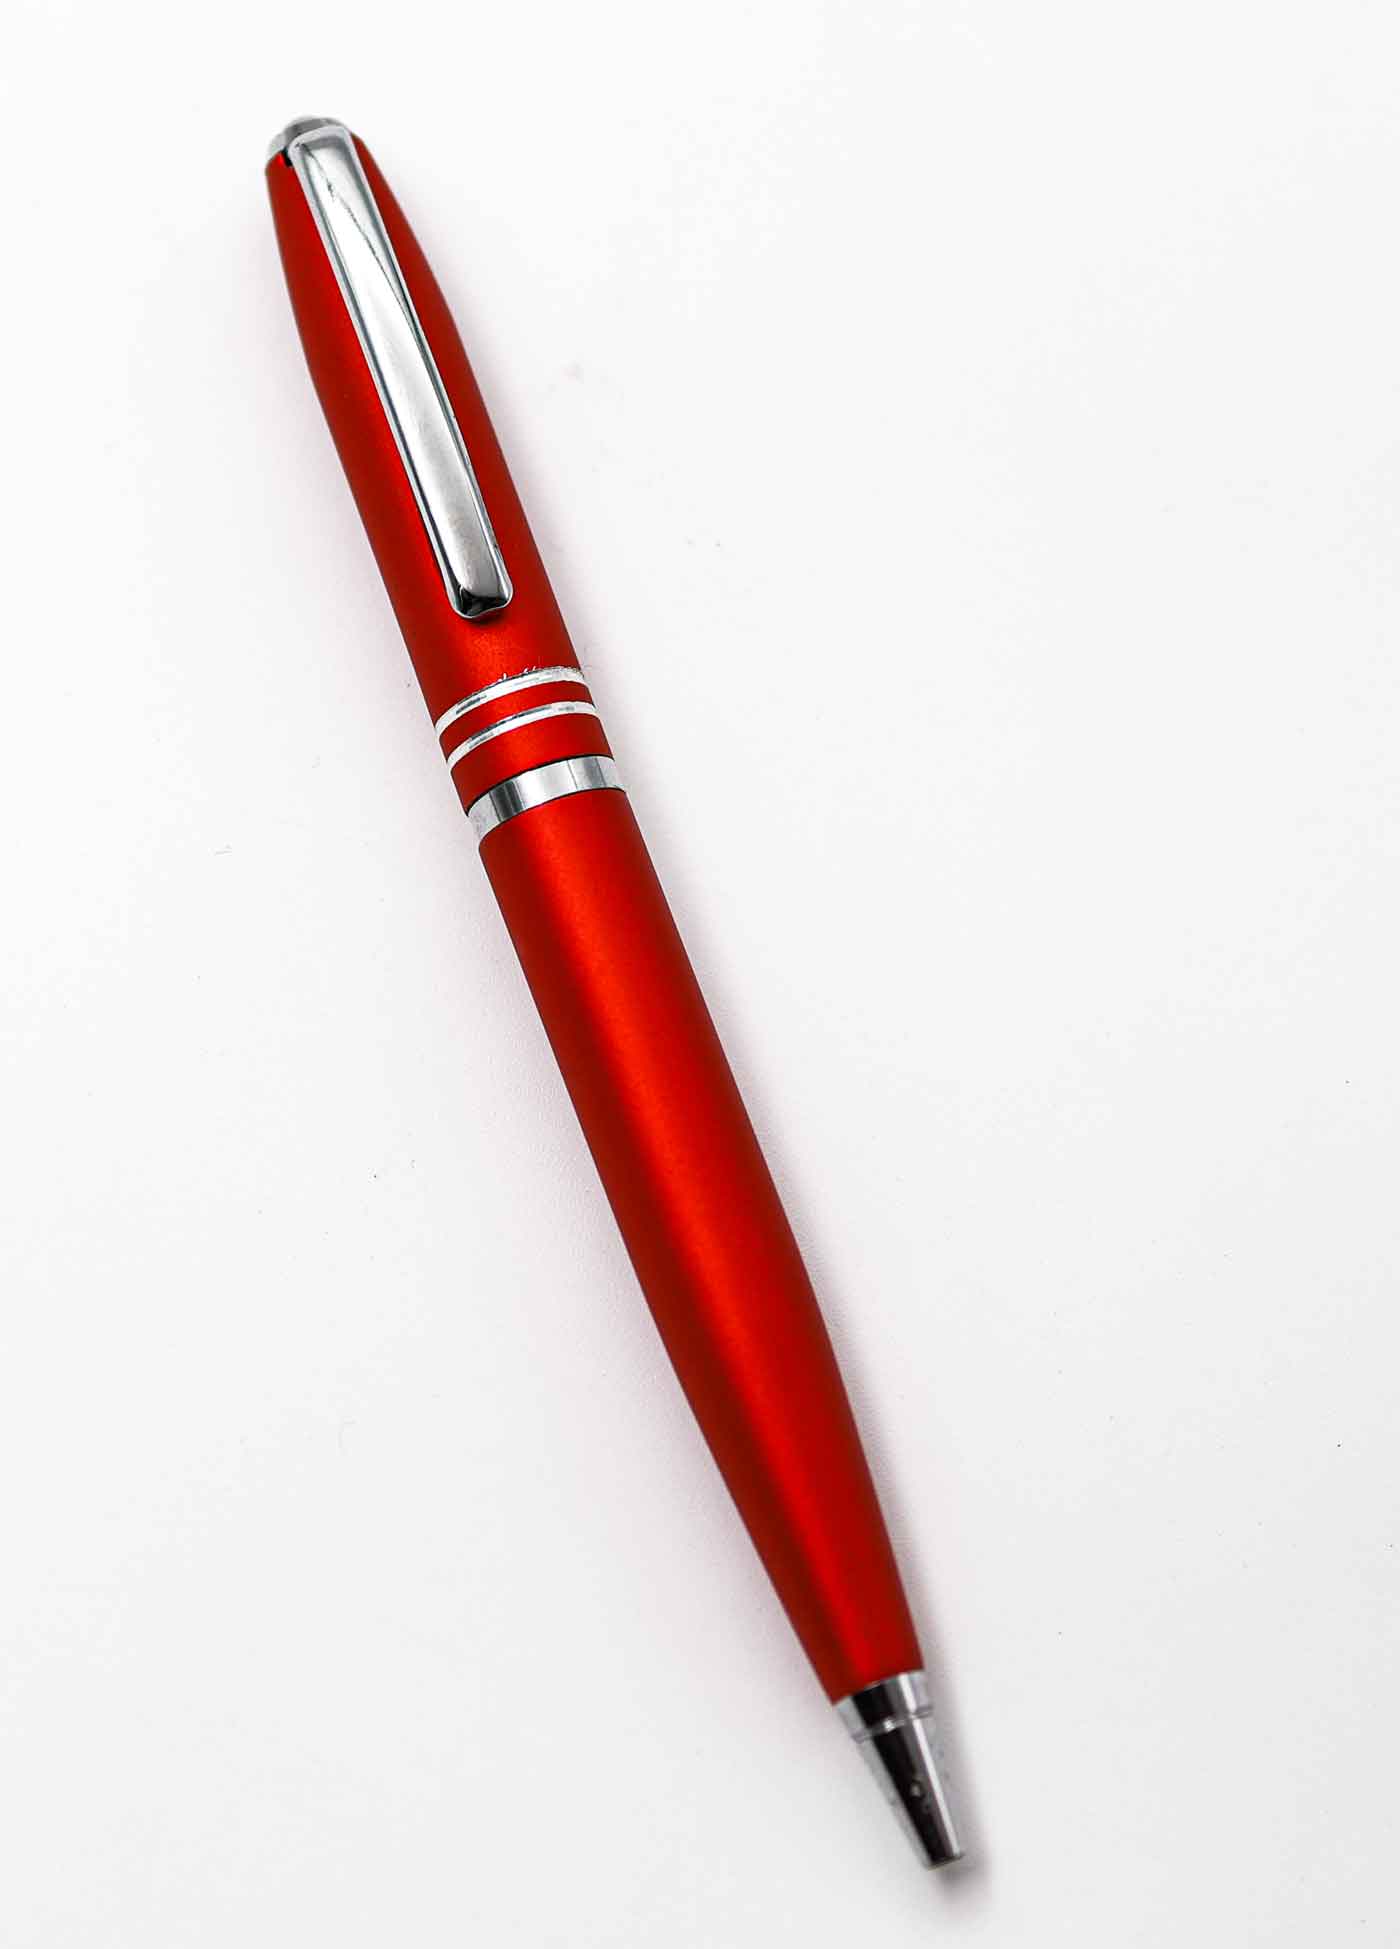 Penhouse.in Matt Red Body With Silver Clip And Trim Fine Tip Twist Type Ball Pen SKU 25181